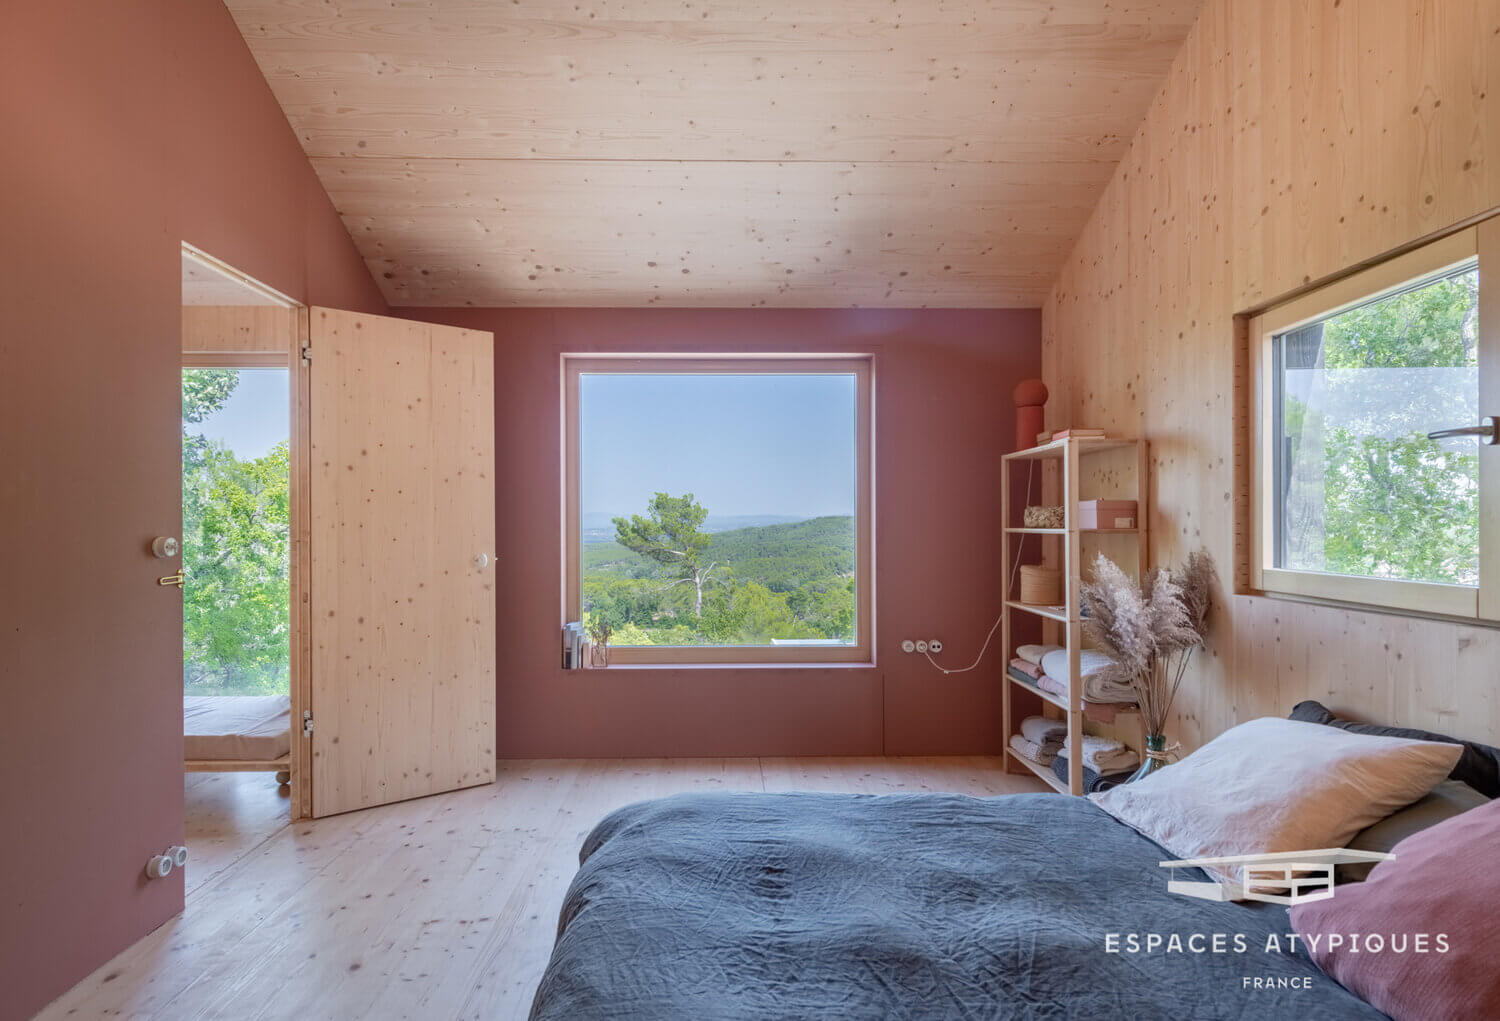 AMinimalisticWoodenHomewithAmazingViewsovertheProvenceCountryside TheNordroom6 A Minimalistic Wooden Home Overlooking the Provence Countryside